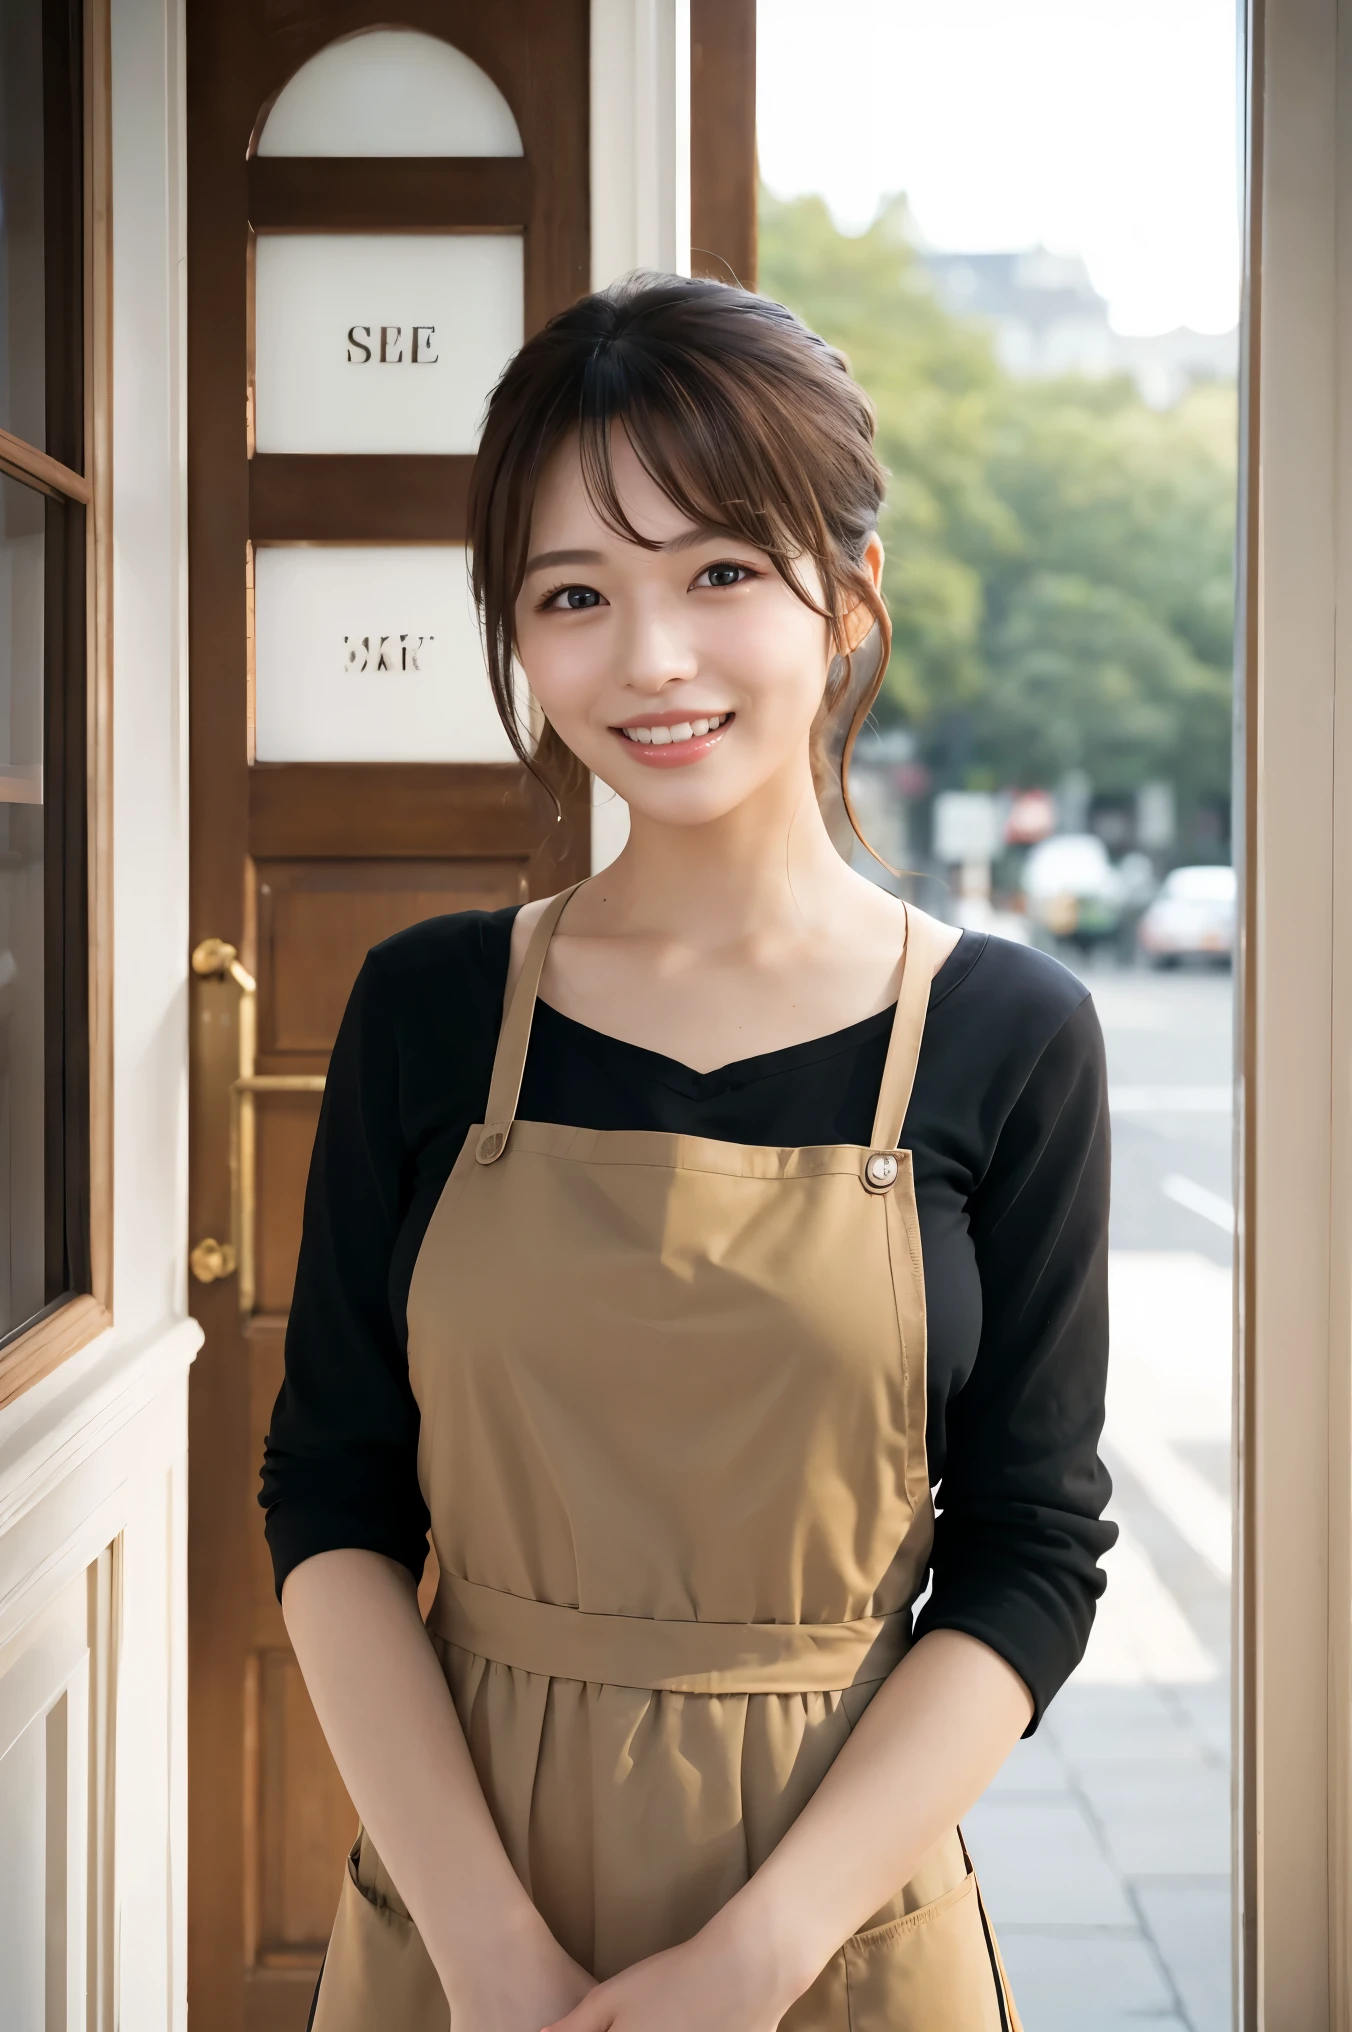 (highest quality、Tabletop、8k、Best image quality、Award-winning works)、Woman working in a café、(The perfect brown apron:1.1)、(The perfect brown apron:1.1)、(Standing elegantly with a blurred cafe entrance in the background:1.3)、(A classy shirt and apron:1.1)、(Big Breasts:1.1)、(Accentuate your body lines:1.1)、Beautiful woman portrait、The most elegant and cozy cafe、The most natural cafe, Perfectly organized、The most atmospheric and warm lighting、Stylish and elegant cafe、Strongly blurred background、Look at me and smile、(Accurate anatomy:1.2)、Ultra high resolution perfect beautiful teeth、Ultra-high definition beauty face、Ultra HD Hair、Ultra HD The Shining Eyes、The Shining, Super high quality beautiful skin、Super high quality glossy lip